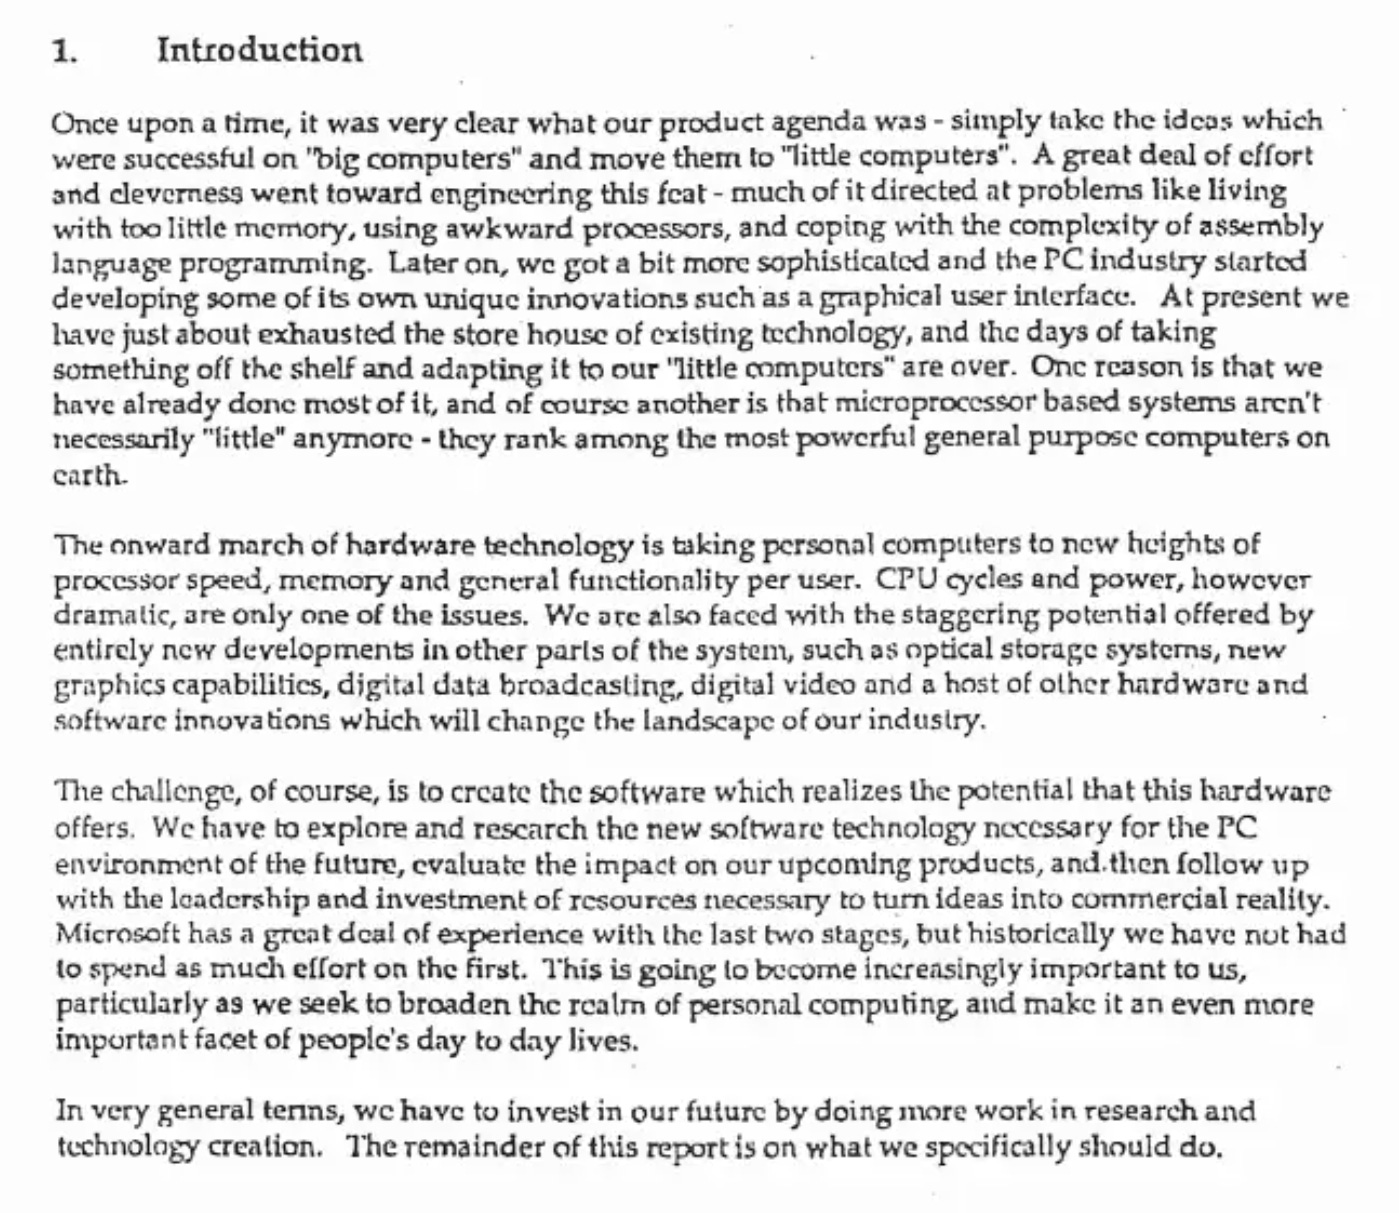 Introduction section of the memo as posted.